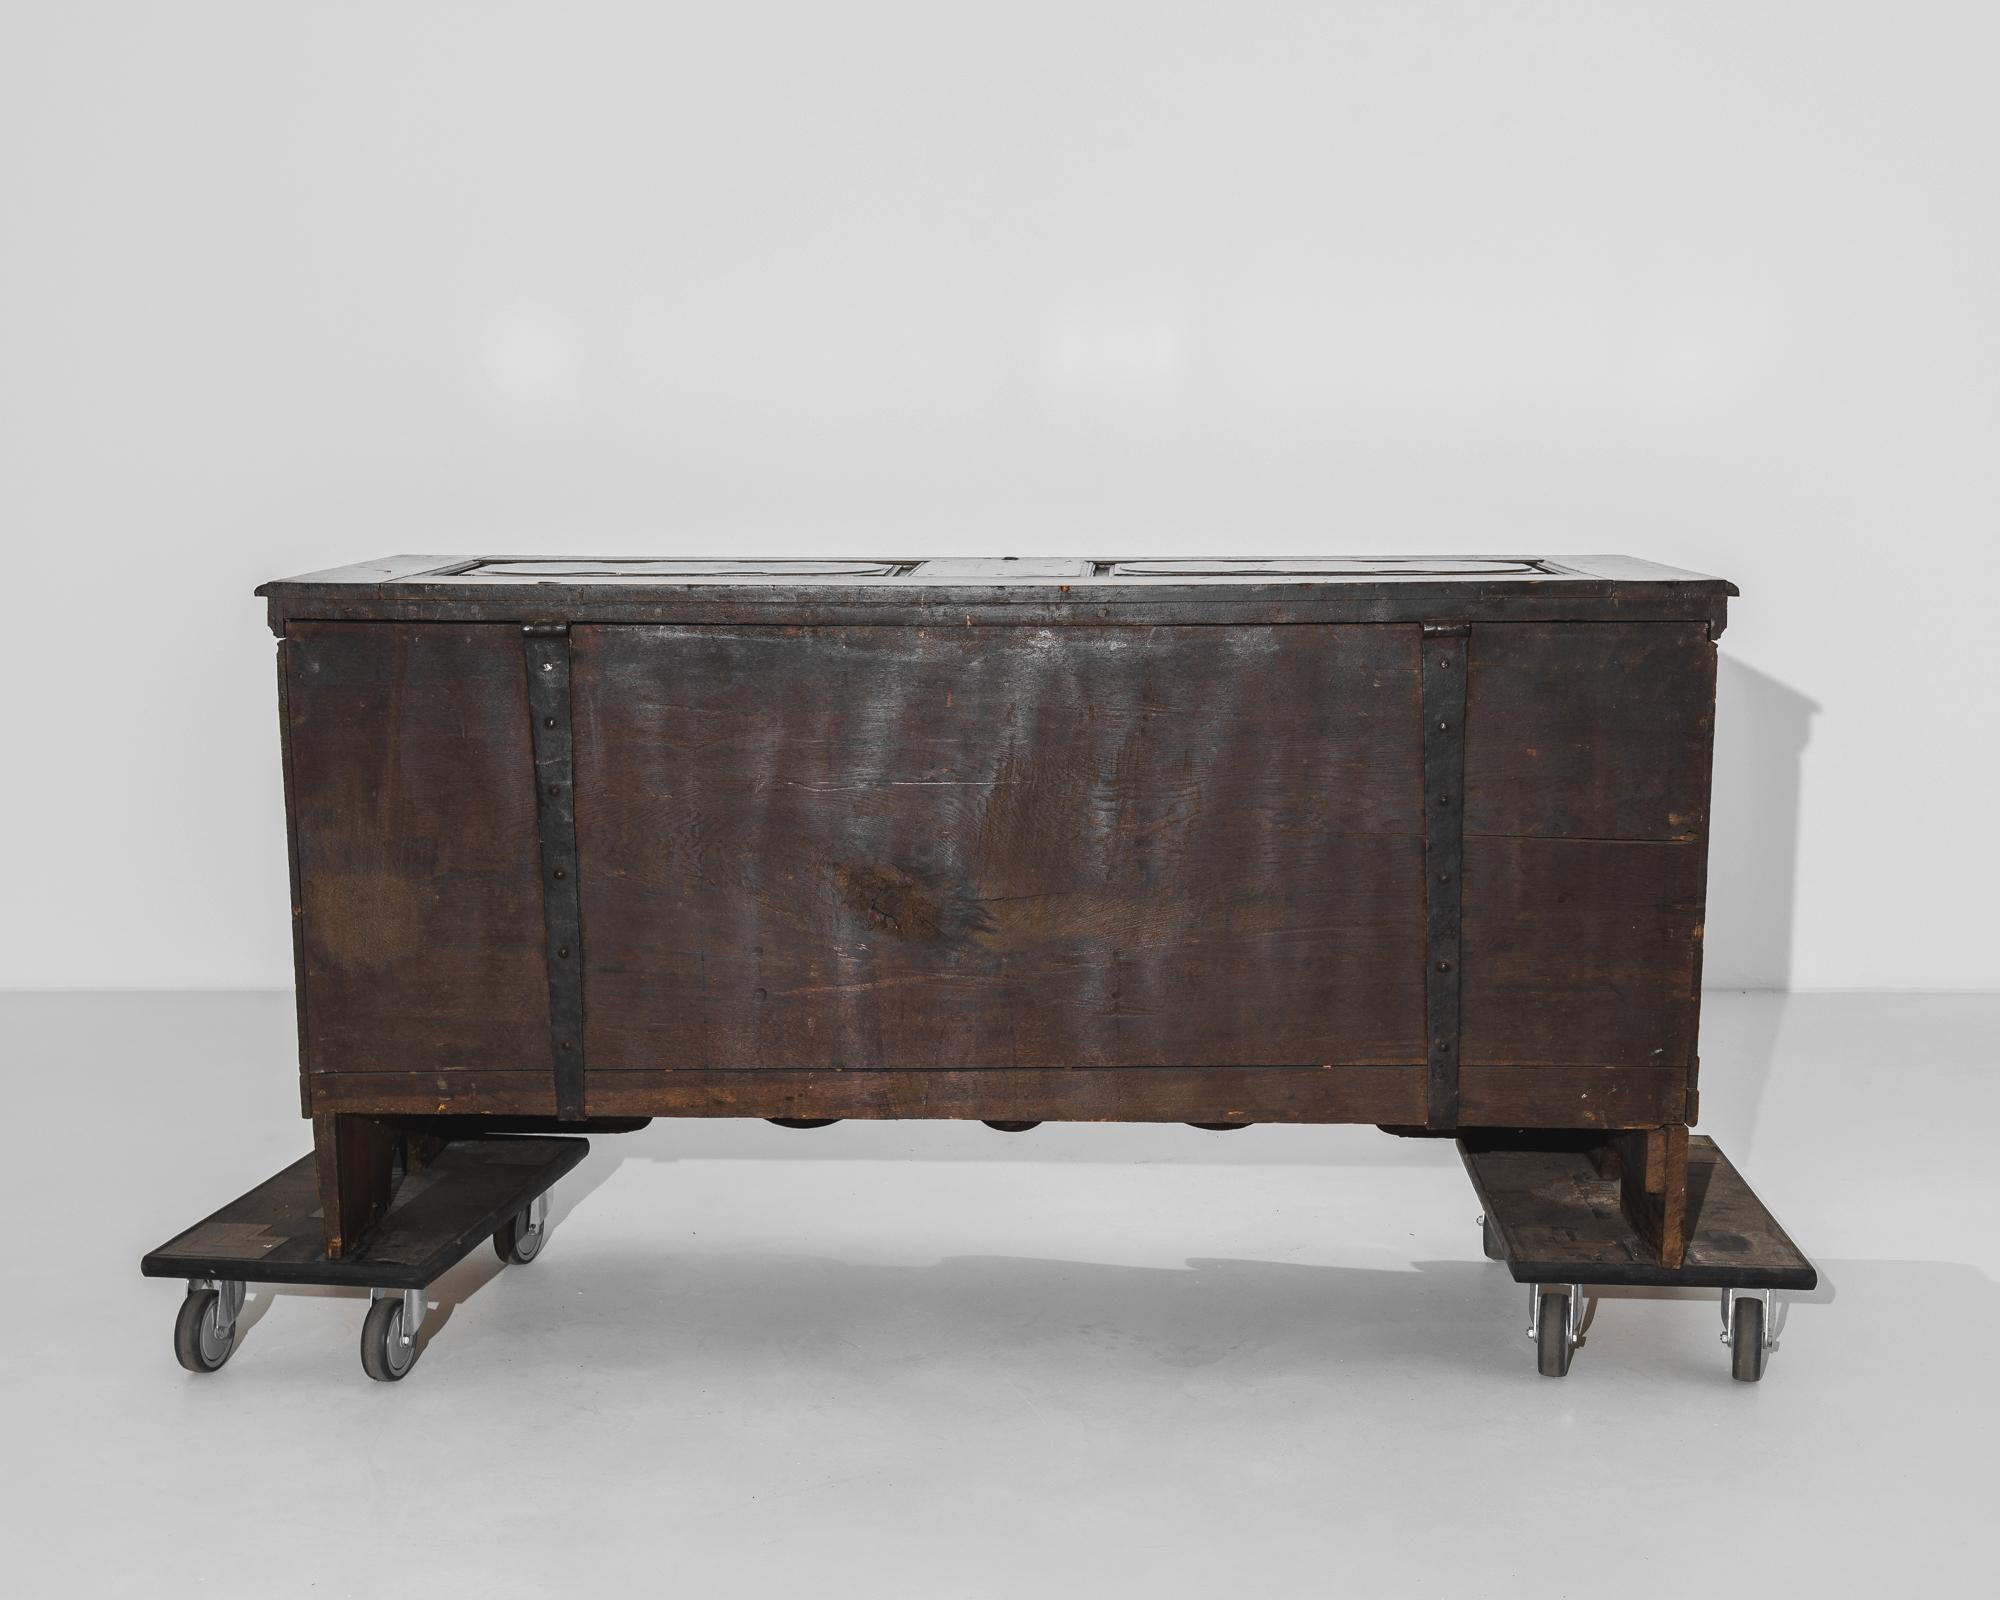 Stepping into the elegant interiors of late 18th-century Germany, this wooden trunk from the 1780s stands as a testament to the enduring craftsmanship and historical significance of the era. Crafted with meticulous attention to detail, this piece